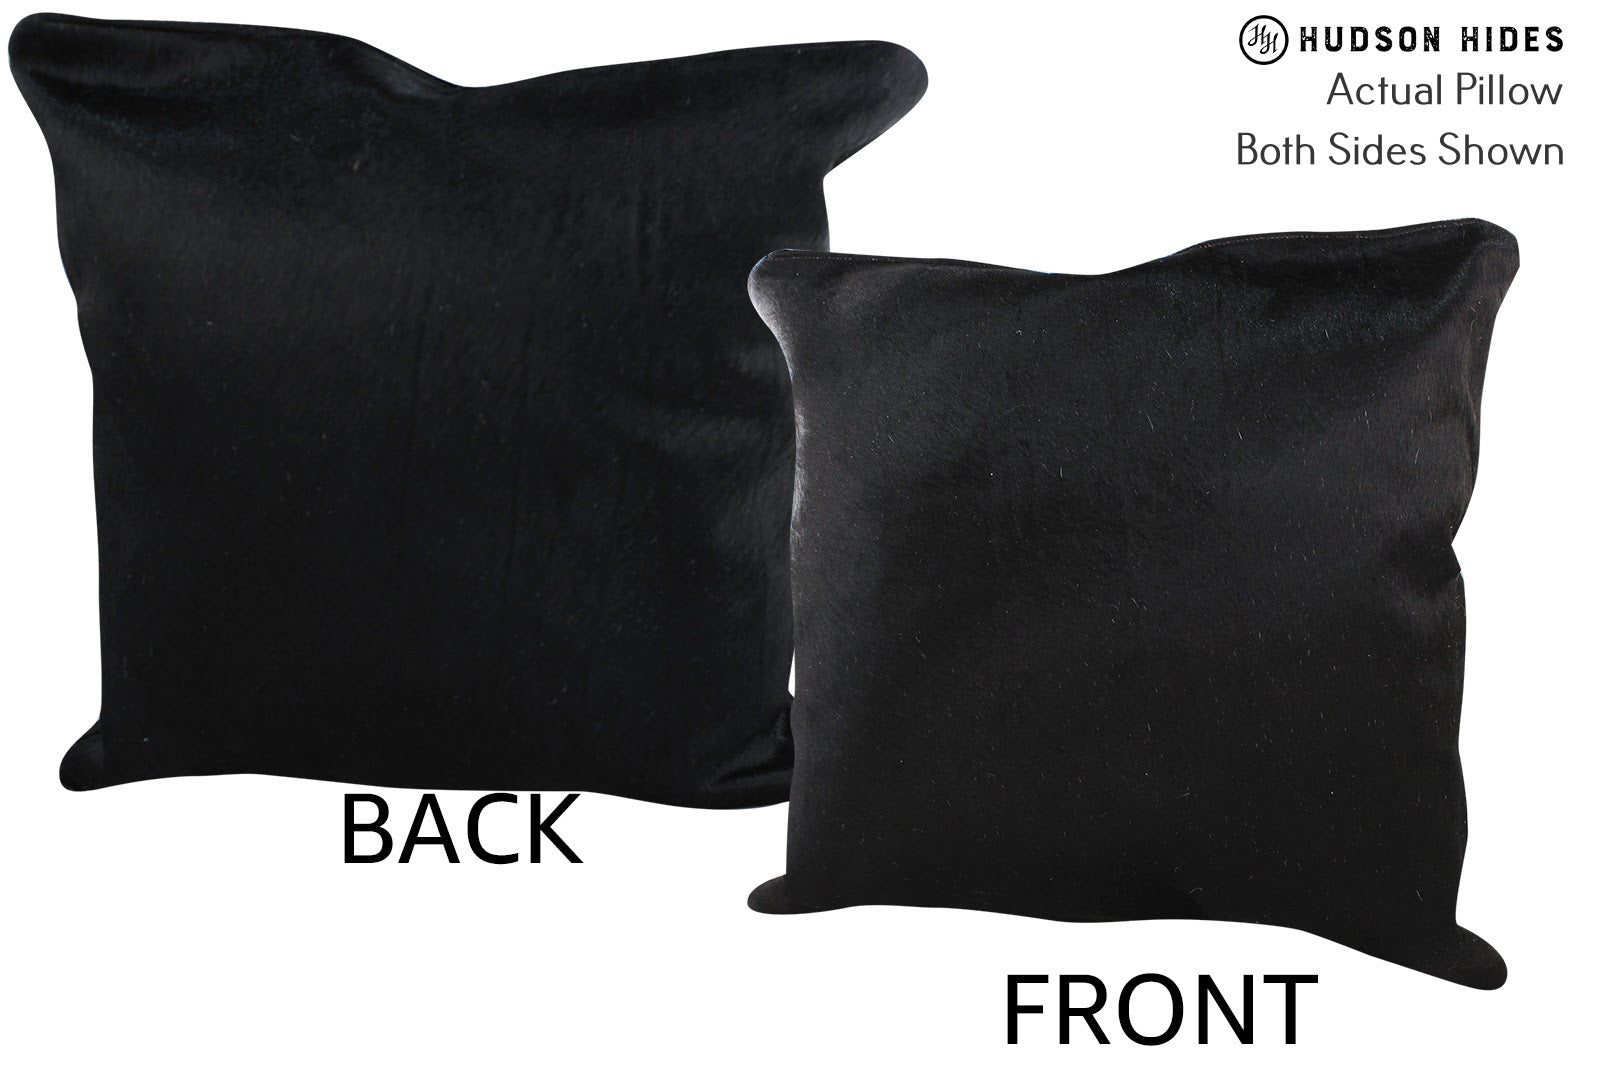 Solid Black Cowhide Pillow #76520